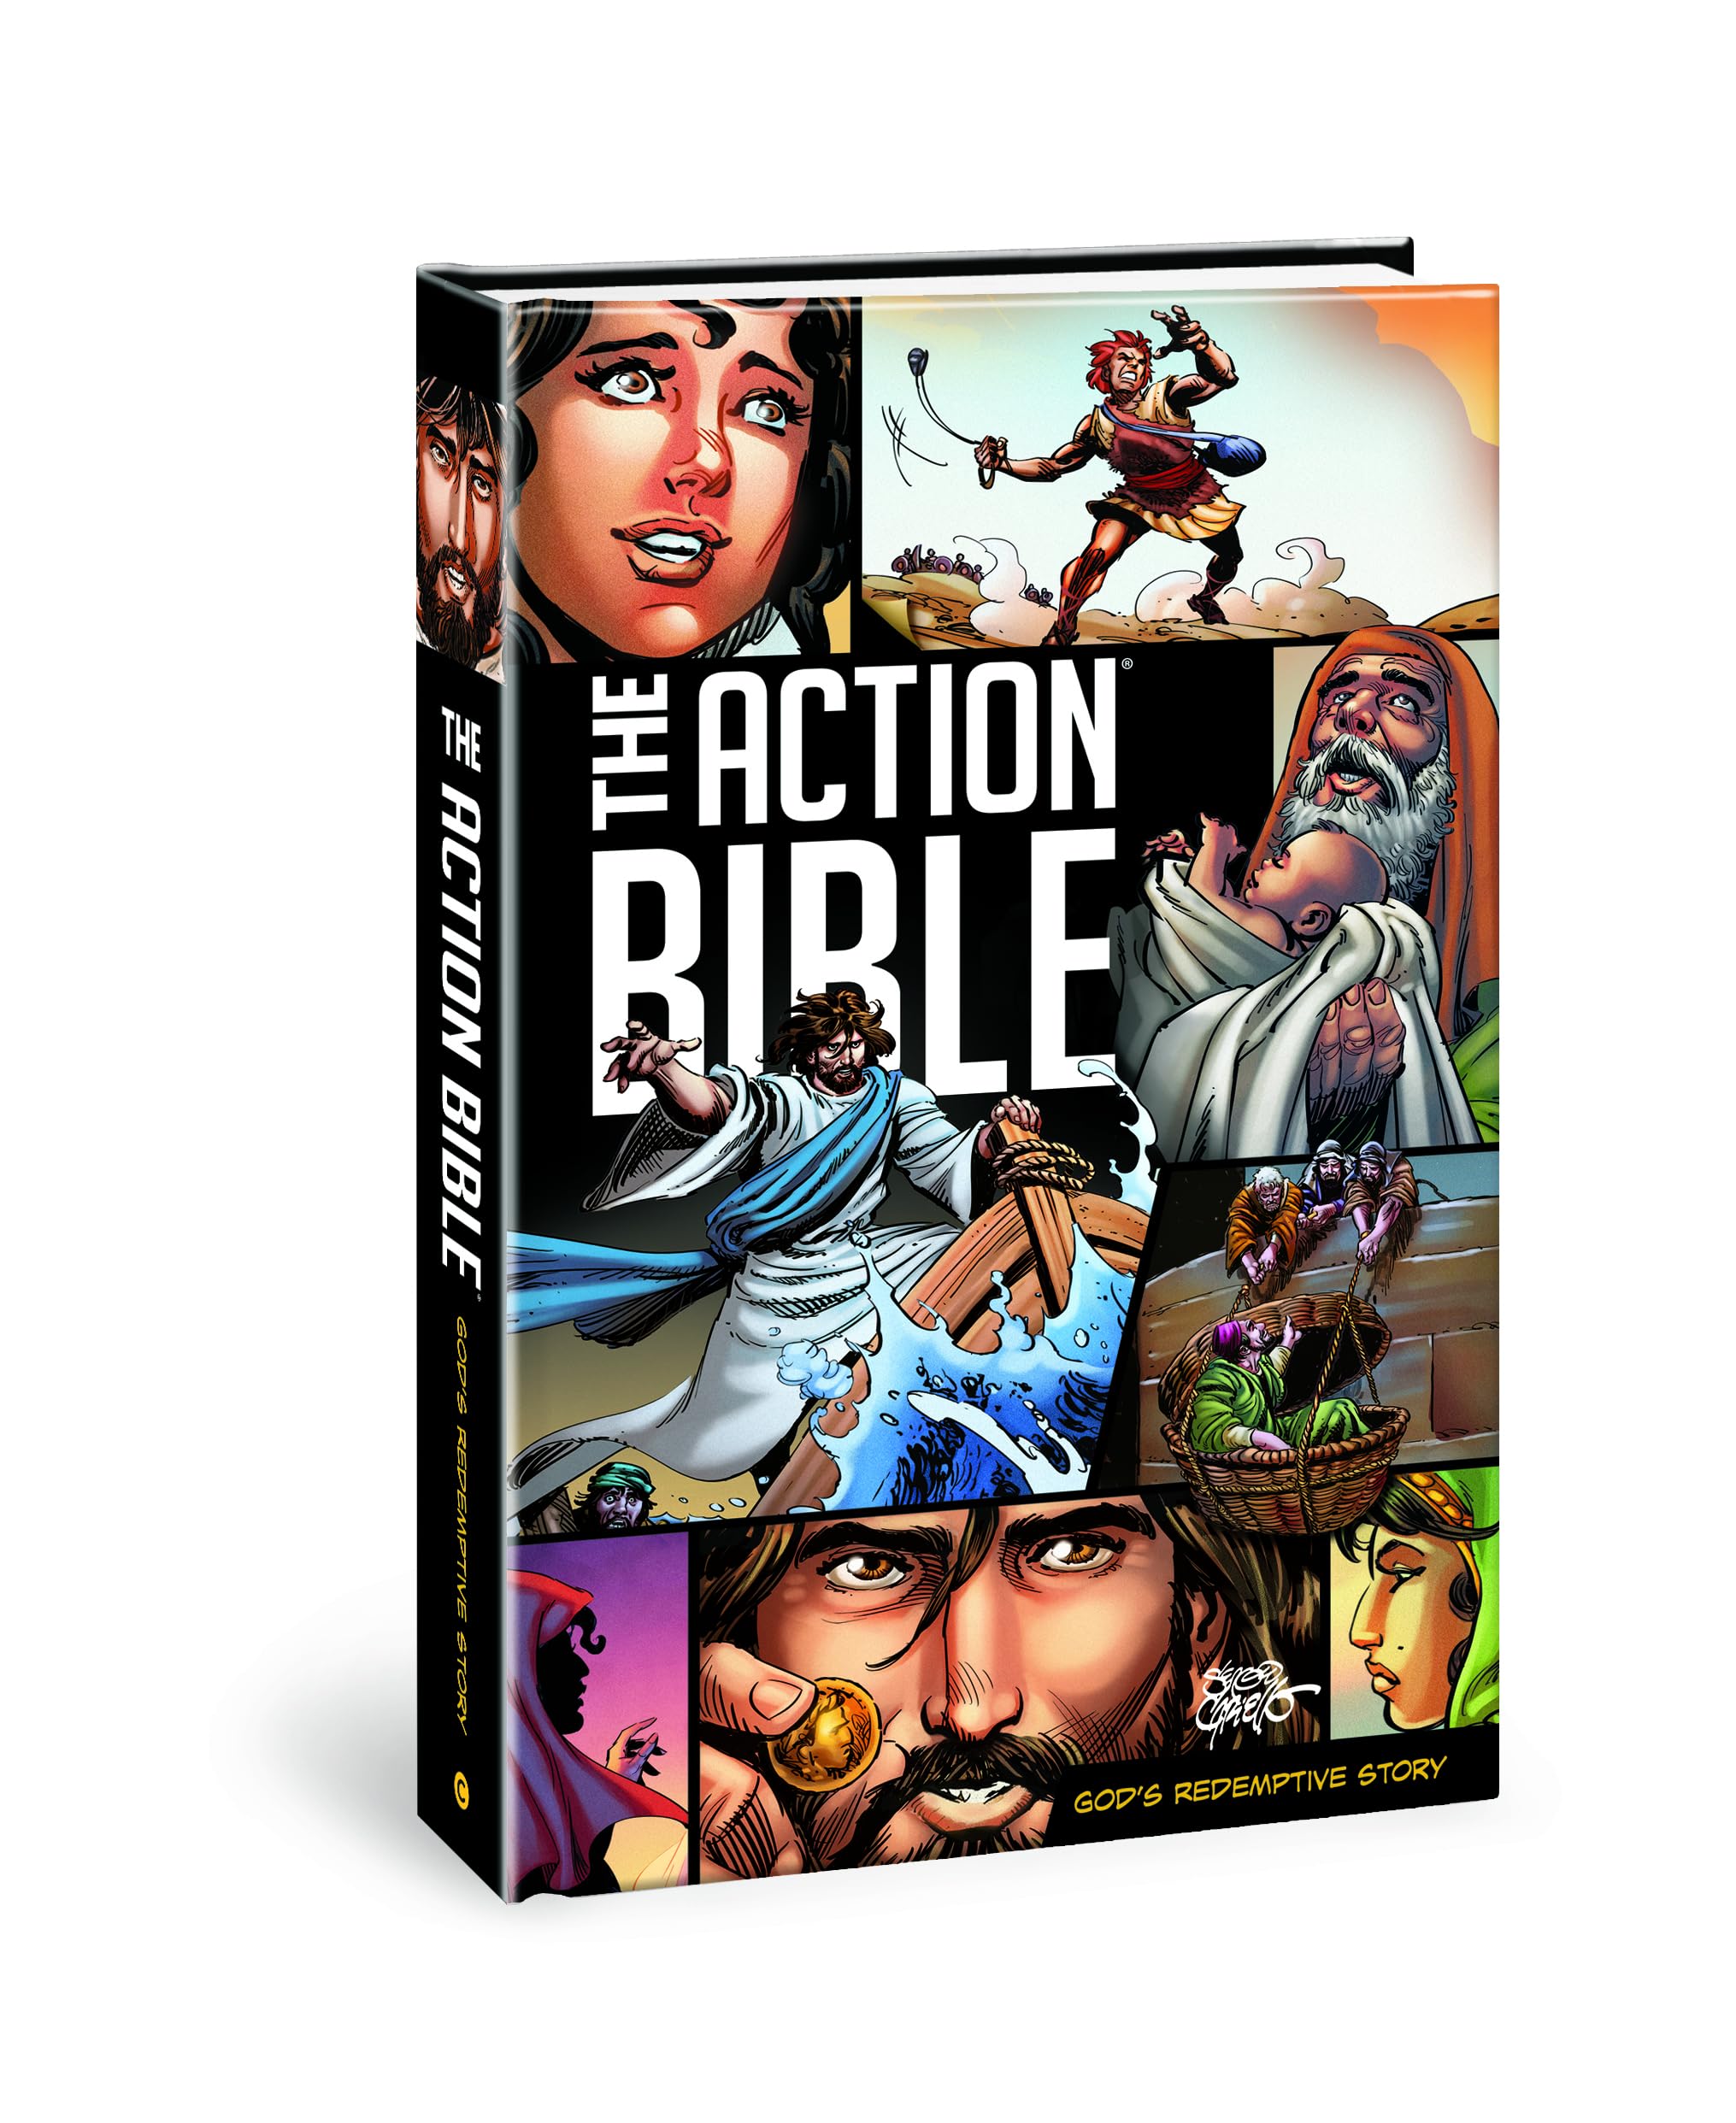 The Action Bible: God's Redemptive Story by Cariello, Sergio